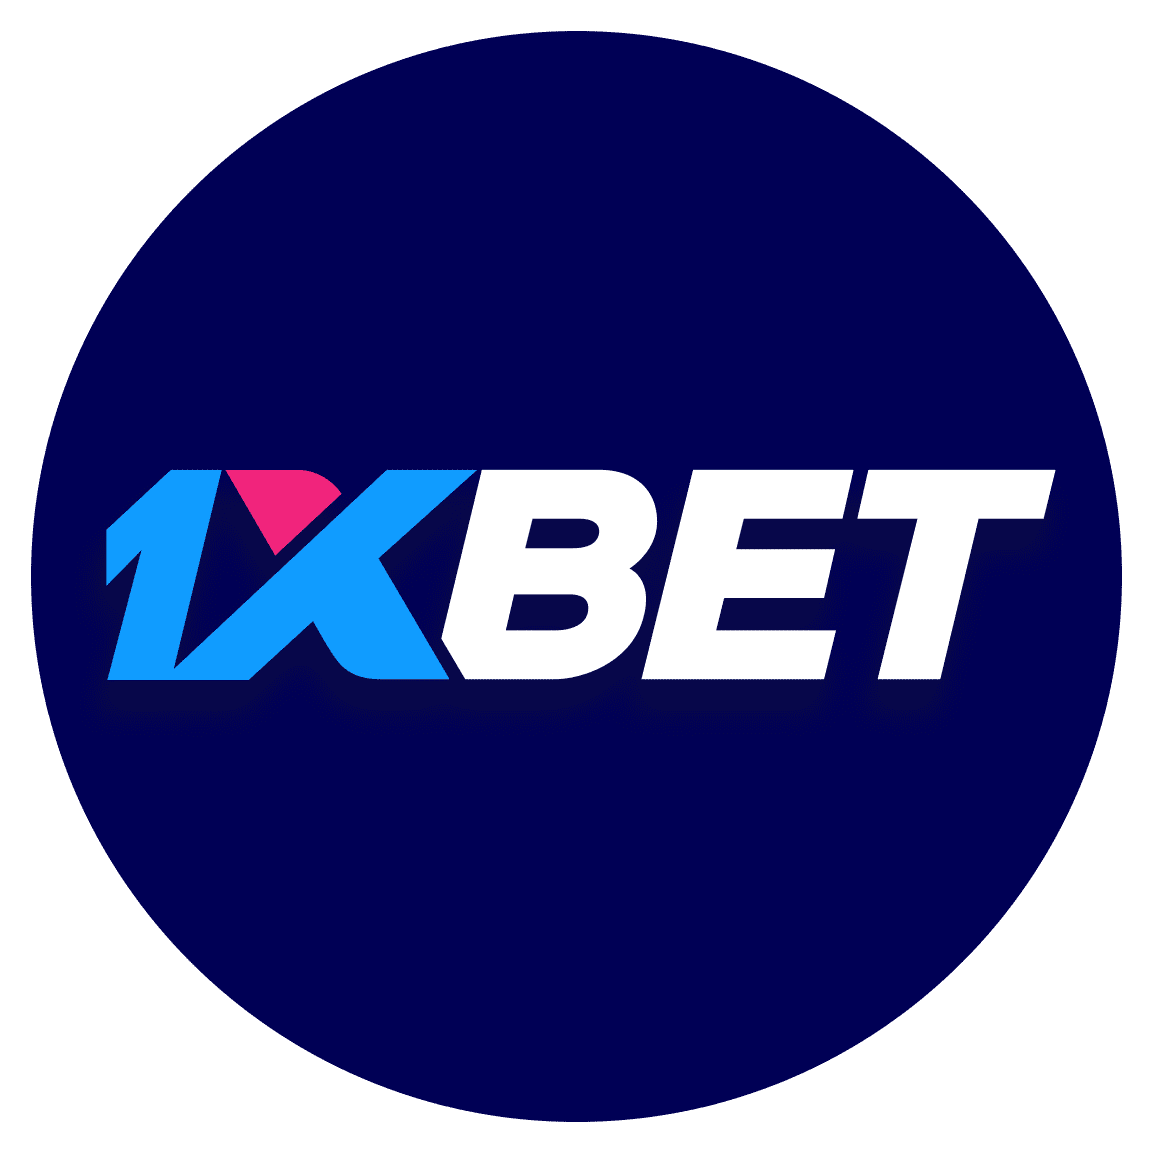 How To Sell 1xbet เครดิตฟรี